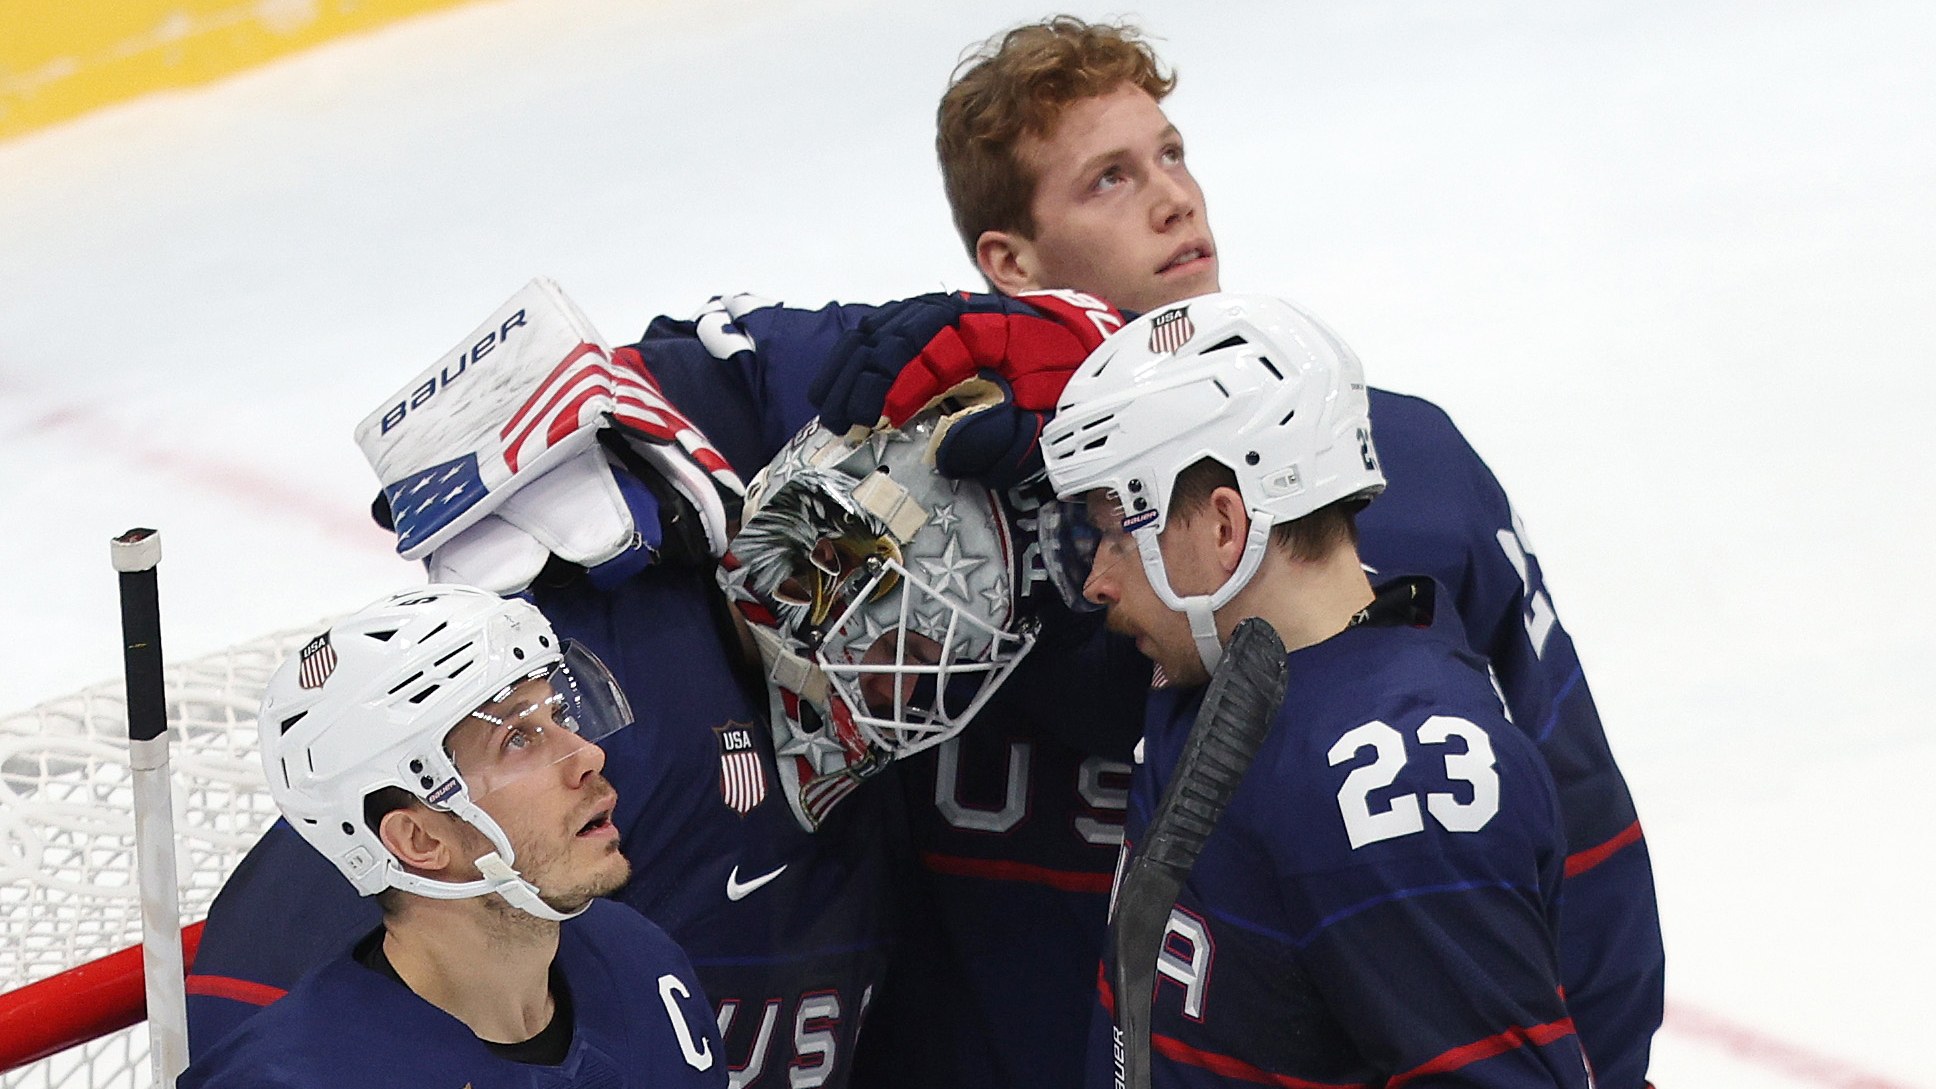 Team USA mens hockey knocked out in quarterfinal game